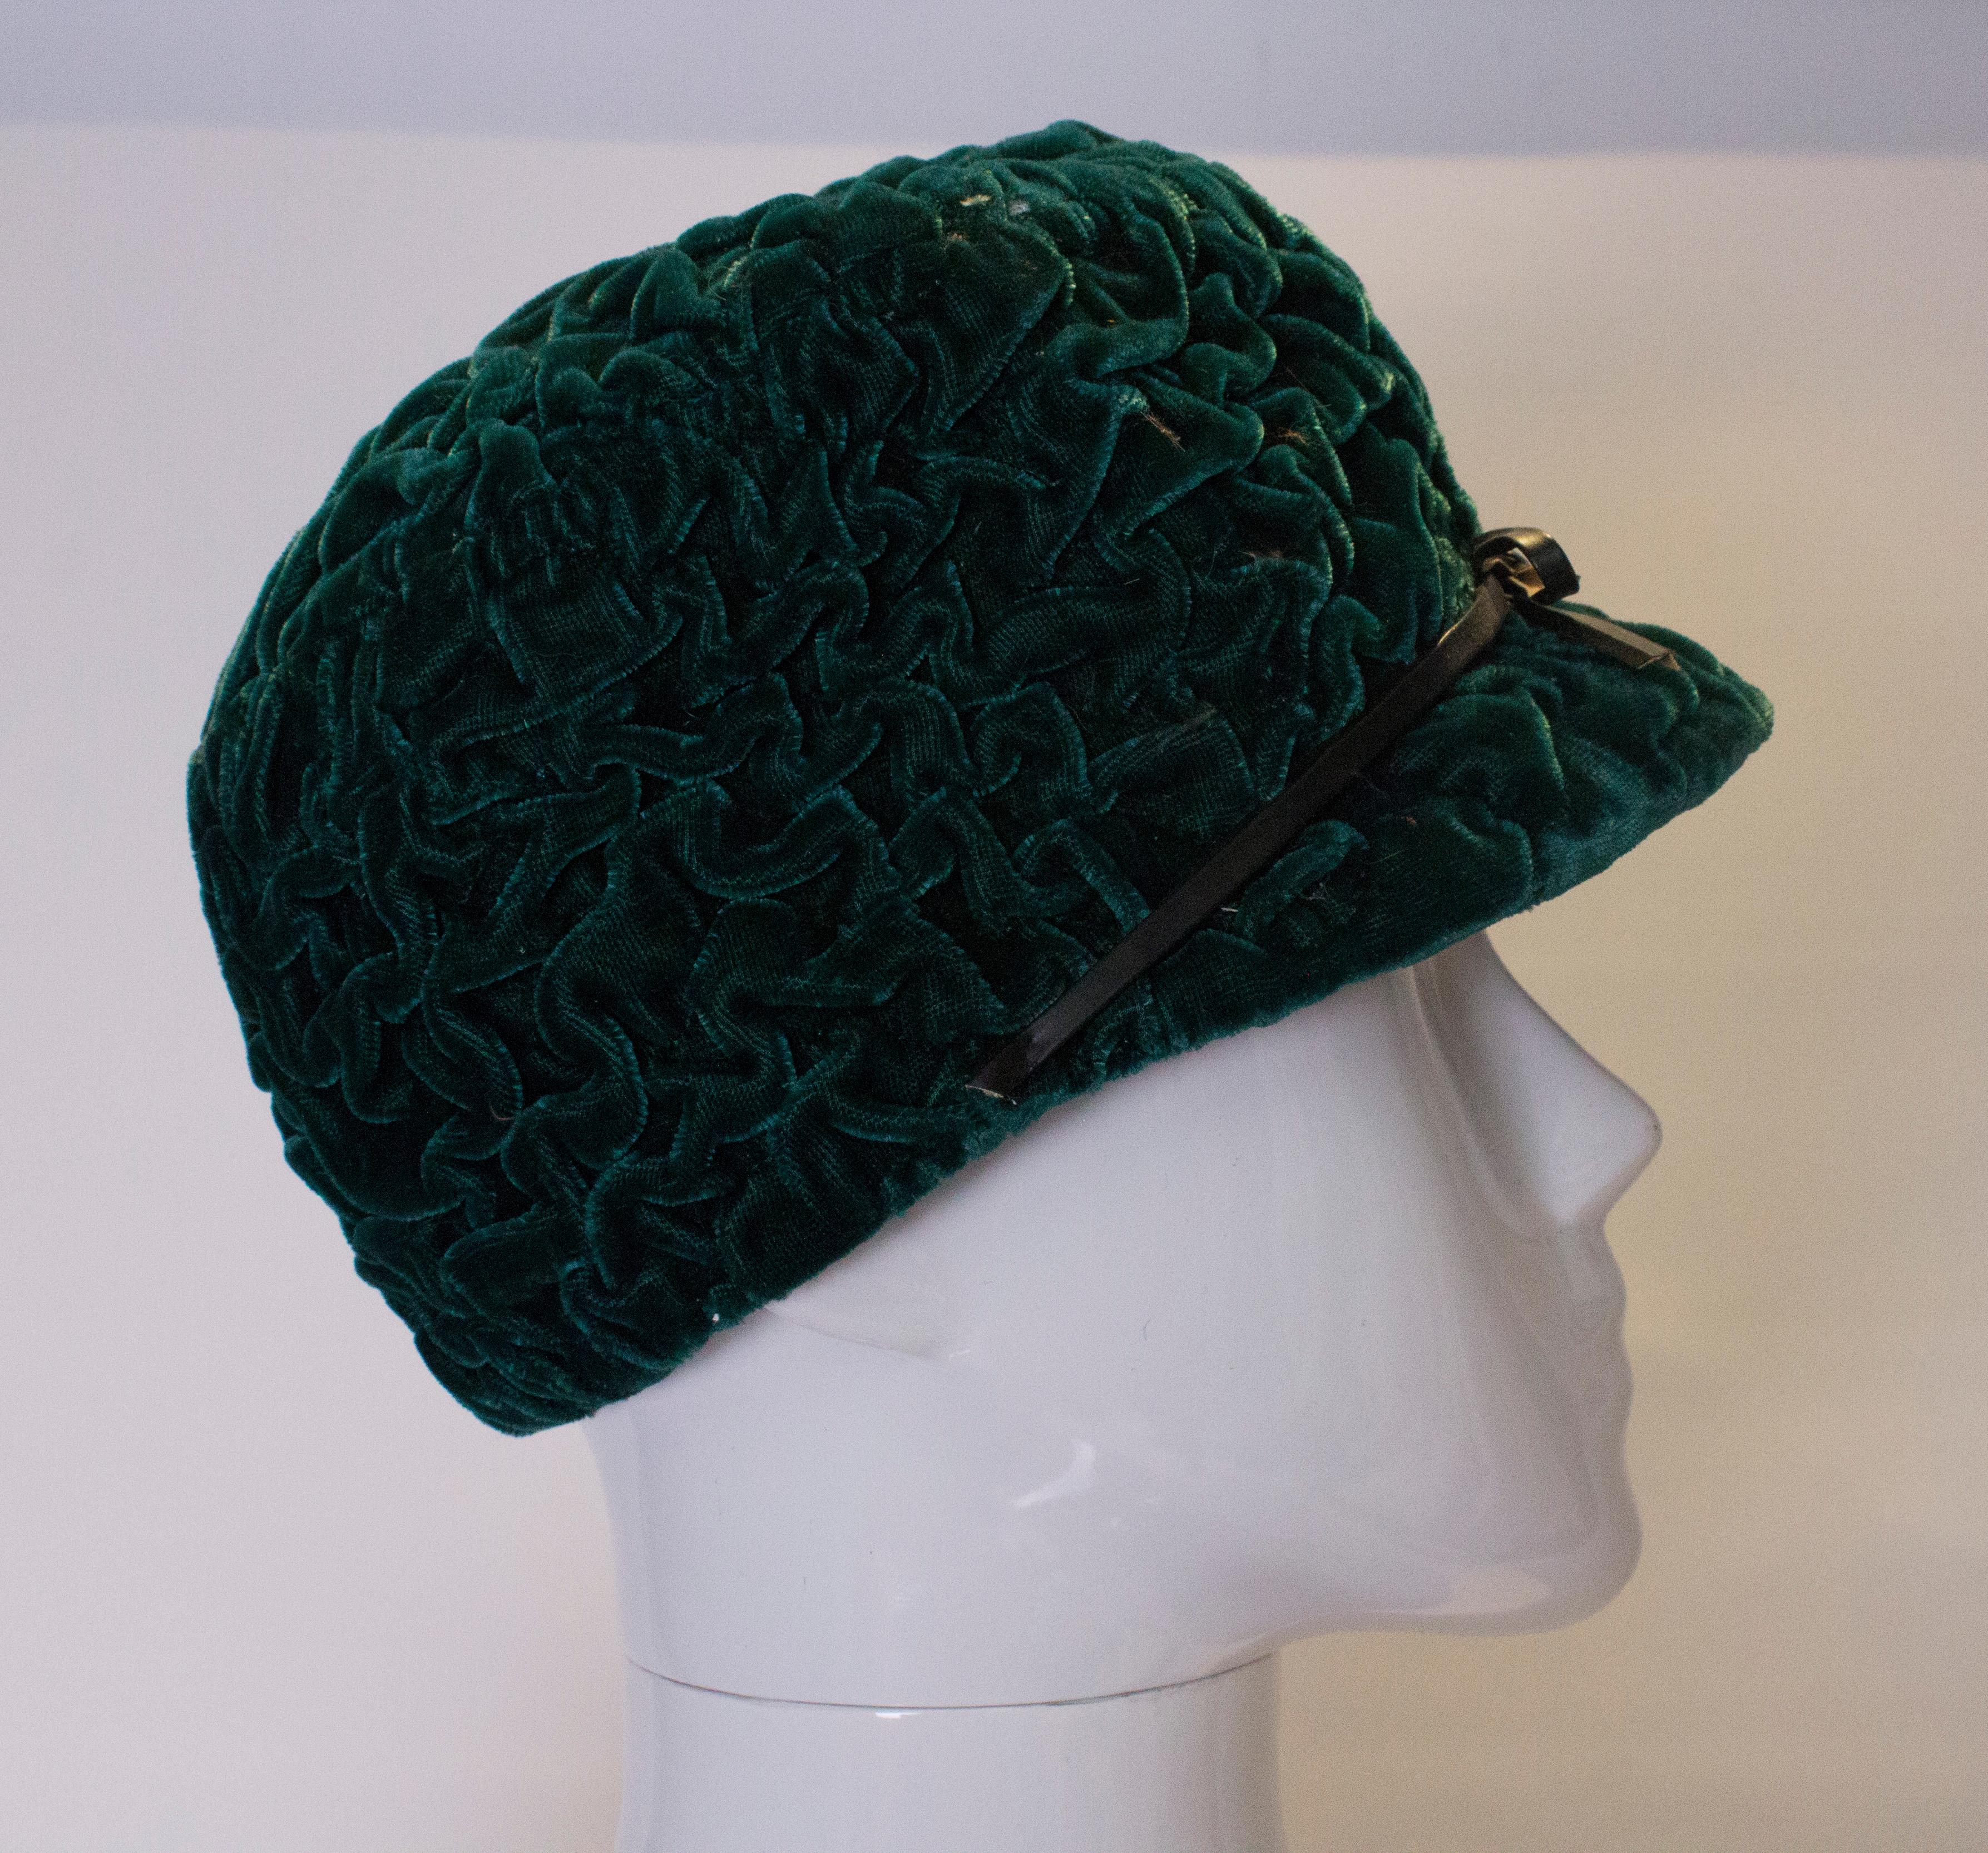 A fund green velvet hat by Jaccoll. The velvet has an interesting texture and is decorated with a black leather ribbon. 